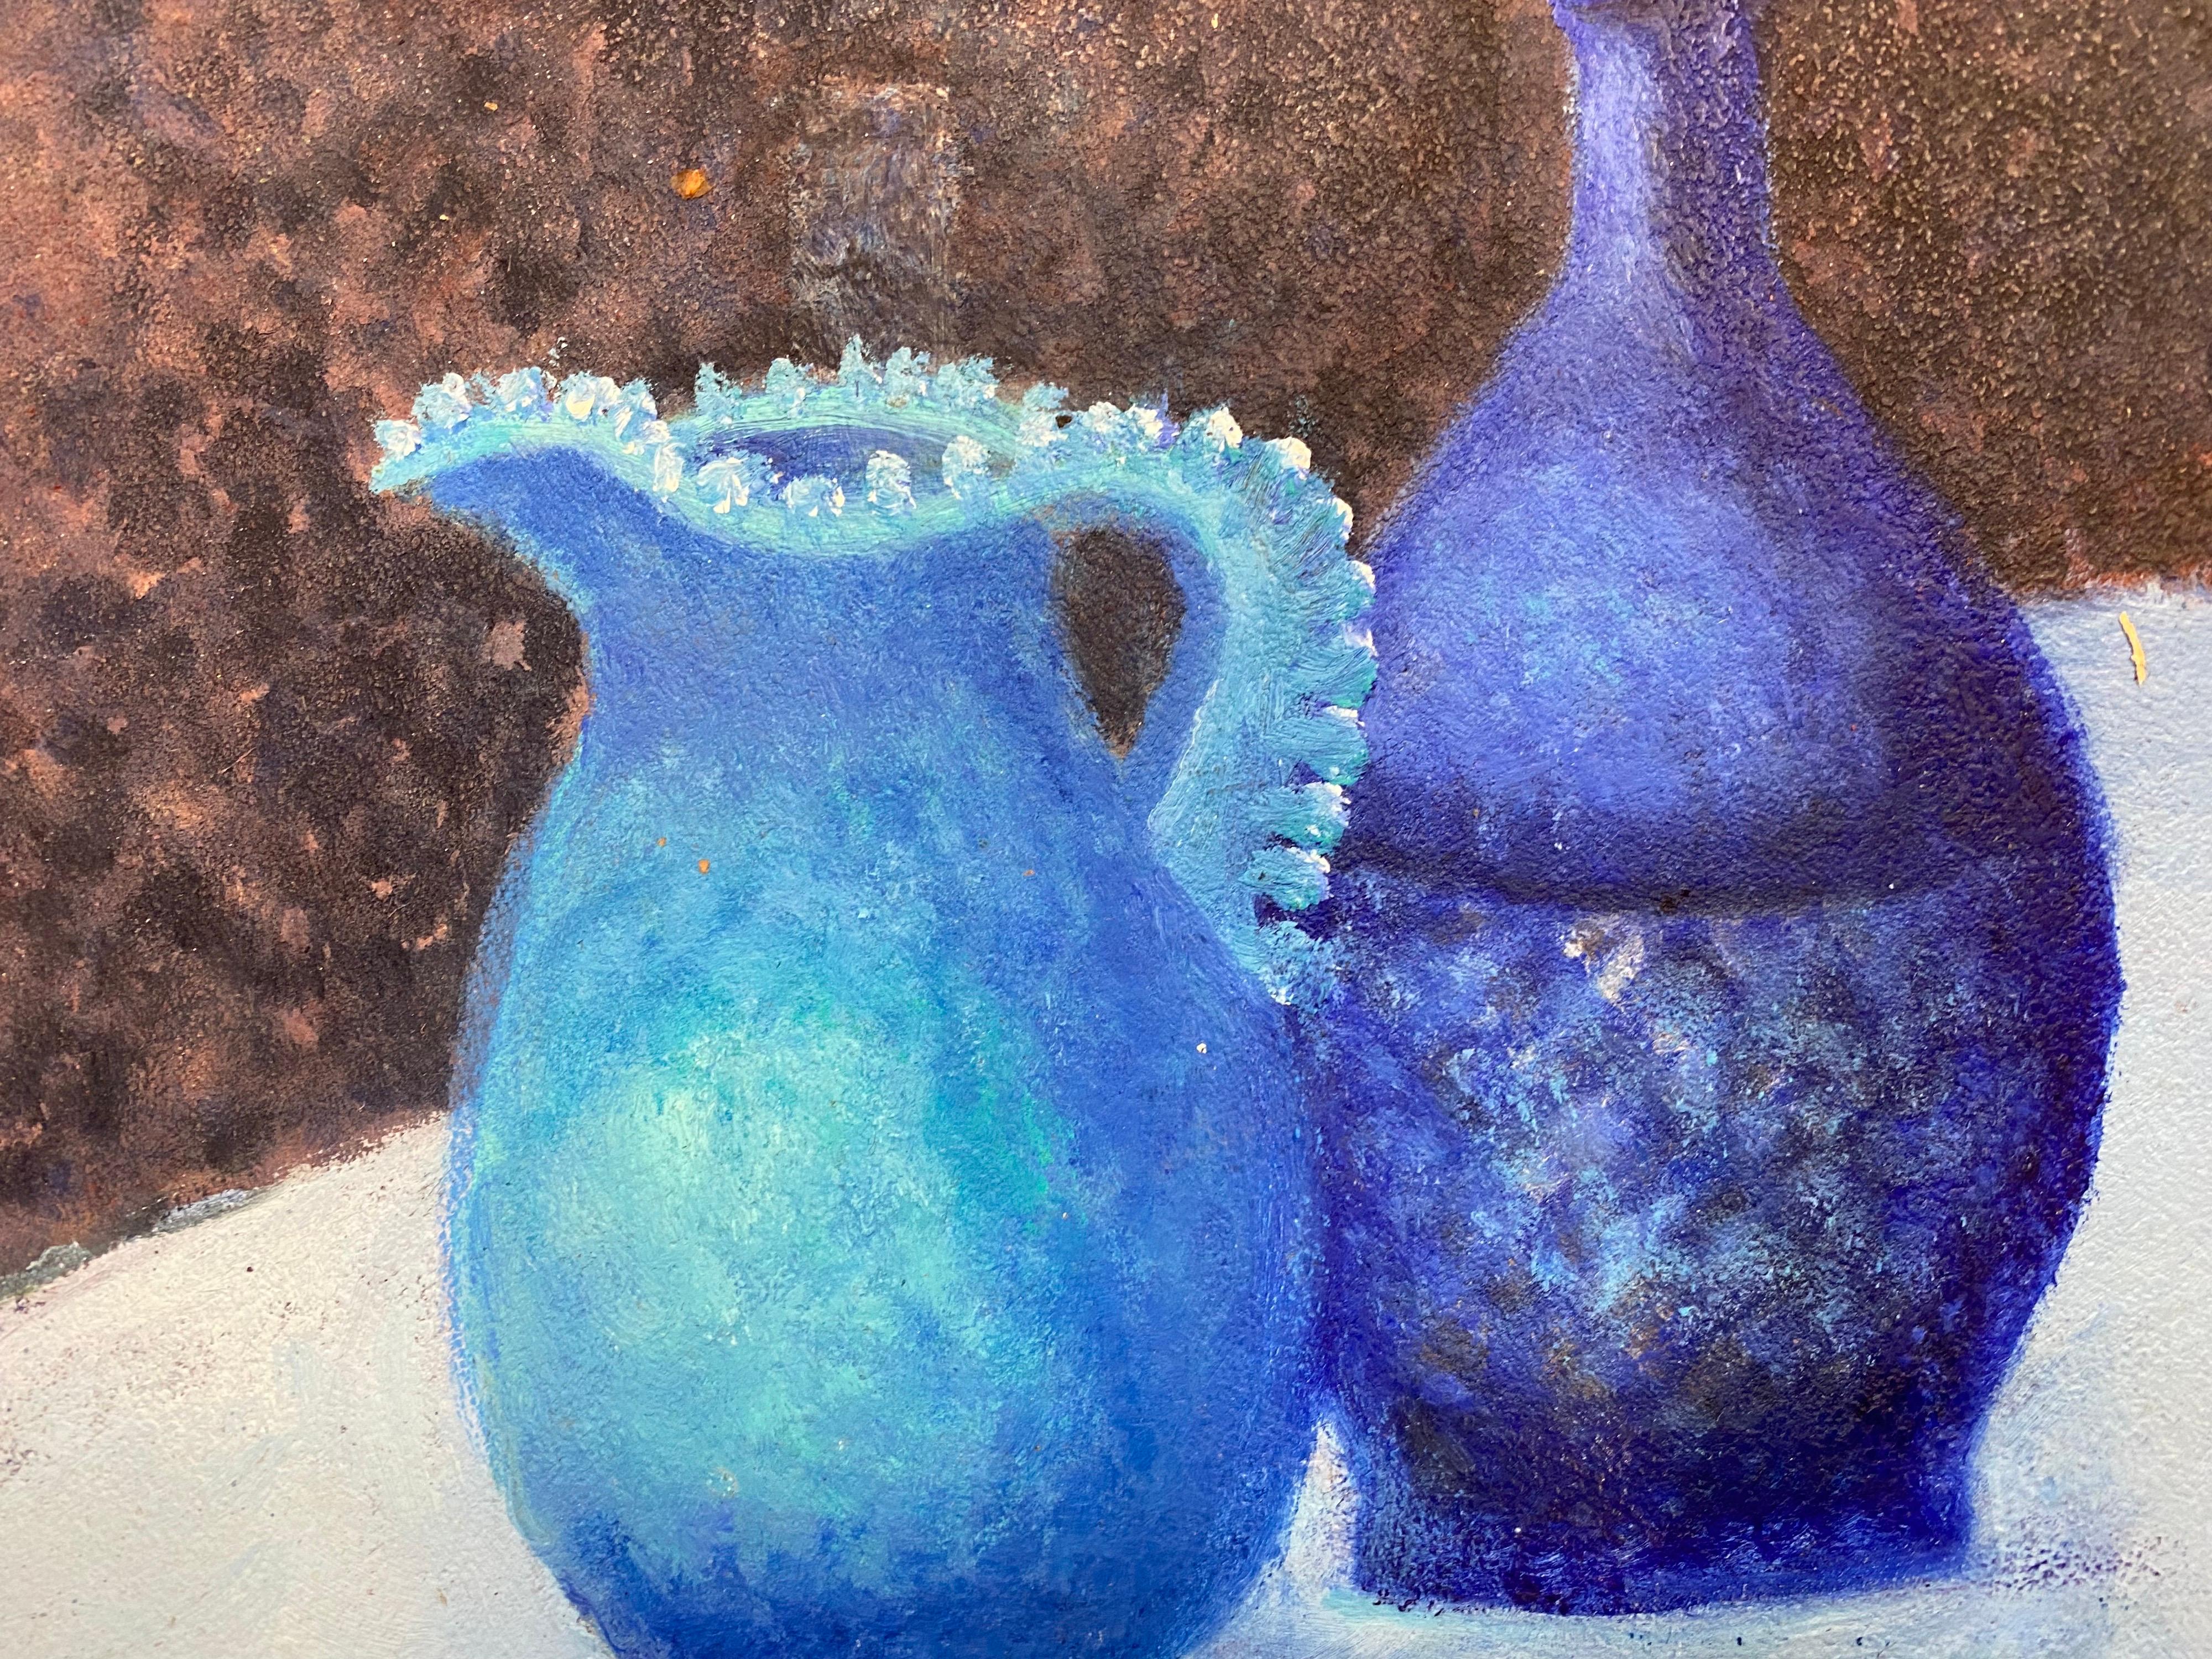 Blue Interior Still Life with Fruit - Painting by Marika Eversfield